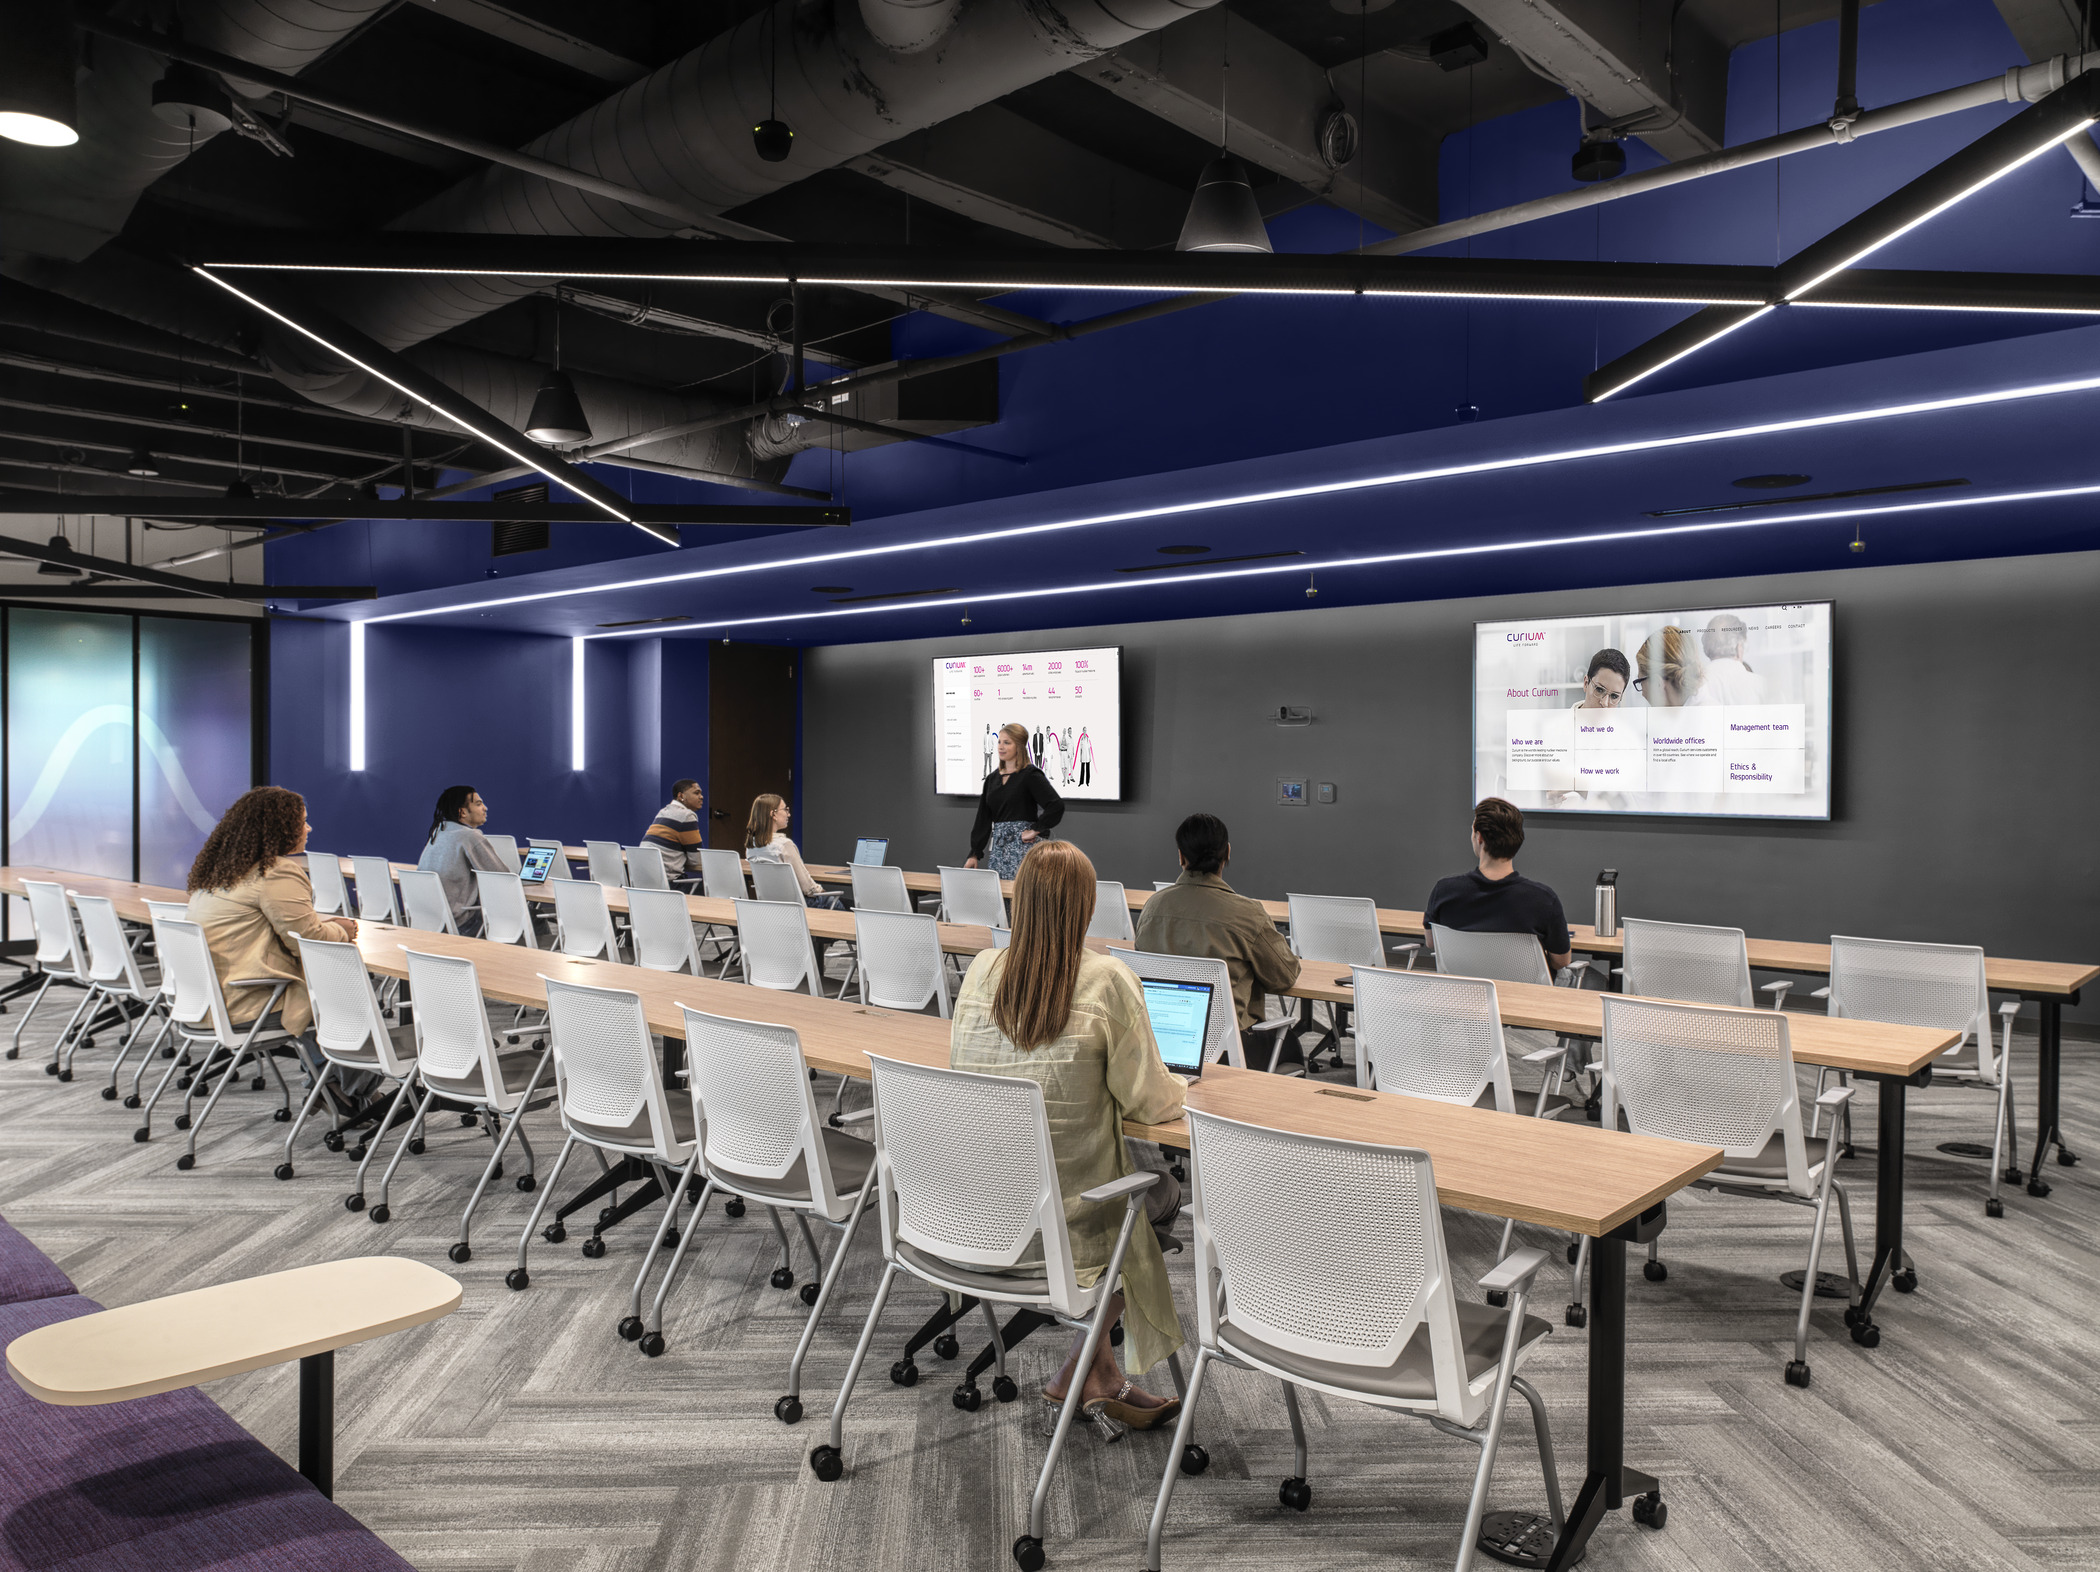 A variety of young people sit in a spacious multipurpose room, with a woman at the front of the room standing in front of two screens branded to Curium graphics. Above, sleek and modern light strips create geometric patterns in the ceiling.